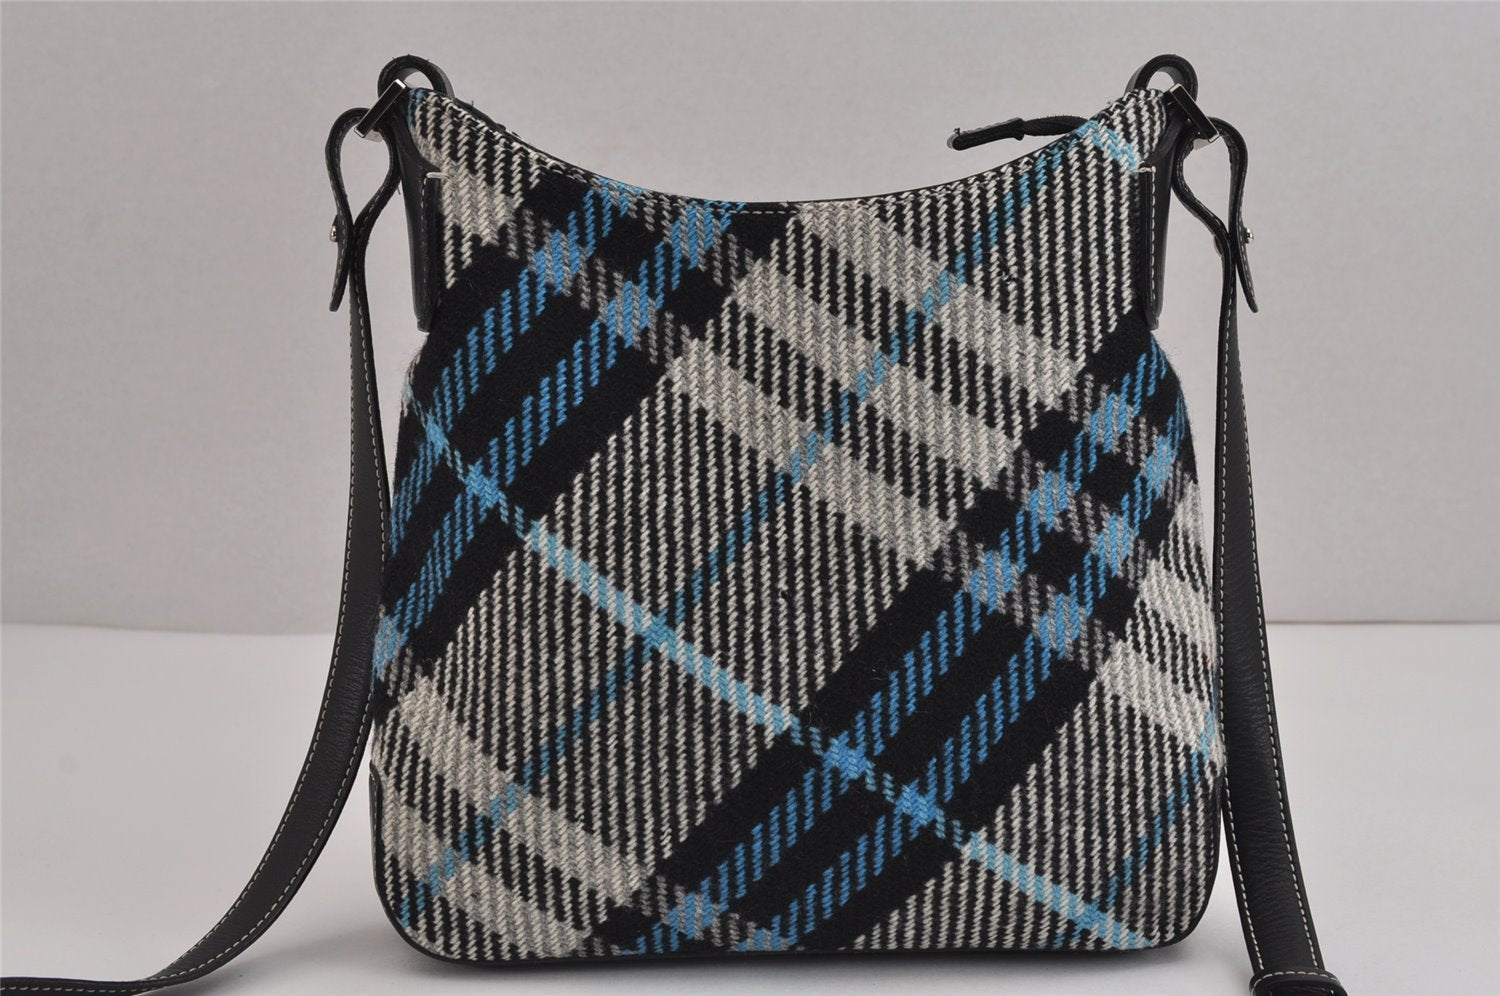 Authentic BURBERRY Check Shoulder Cross Body Bag Purse Wool Leather Black 5299J